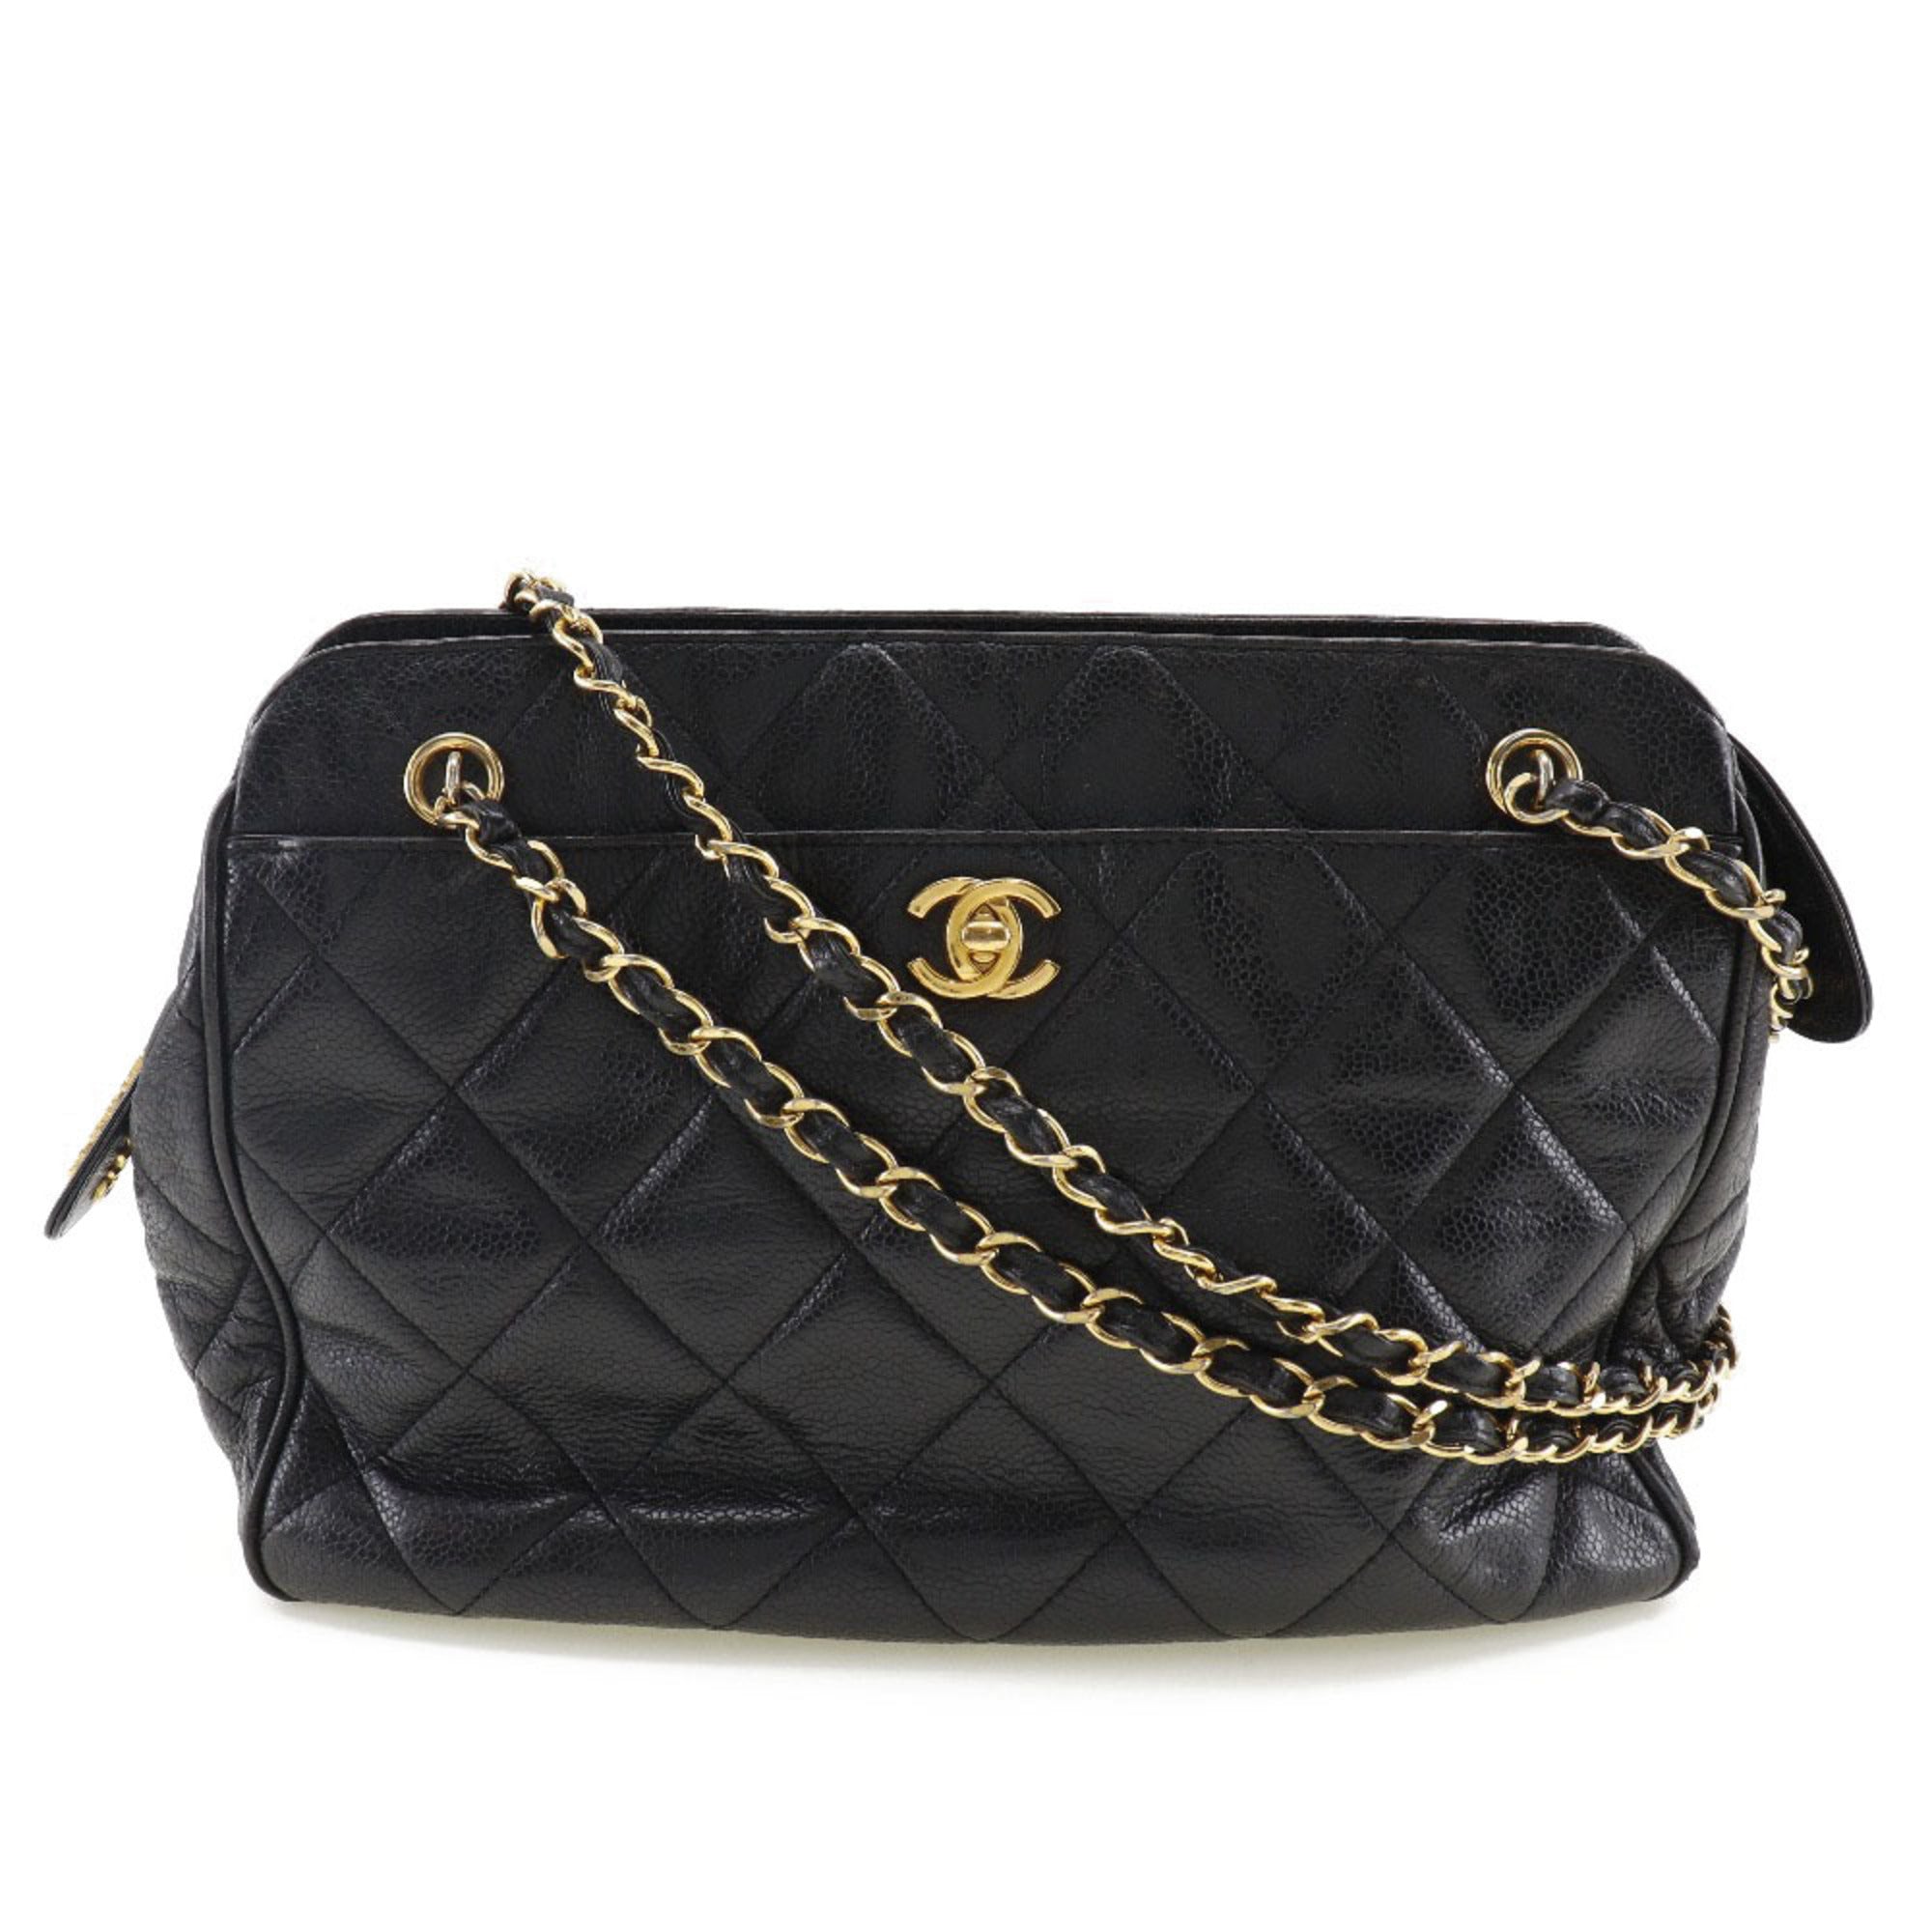 Buy [Used] Chanel Lambskin Chanel 19 Shopping Bag Cocomark Chain Shoulder Bag  Tote Bag AS3660 Black Lambskin Bag AS3660 from Japan - Buy authentic Plus  exclusive items from Japan